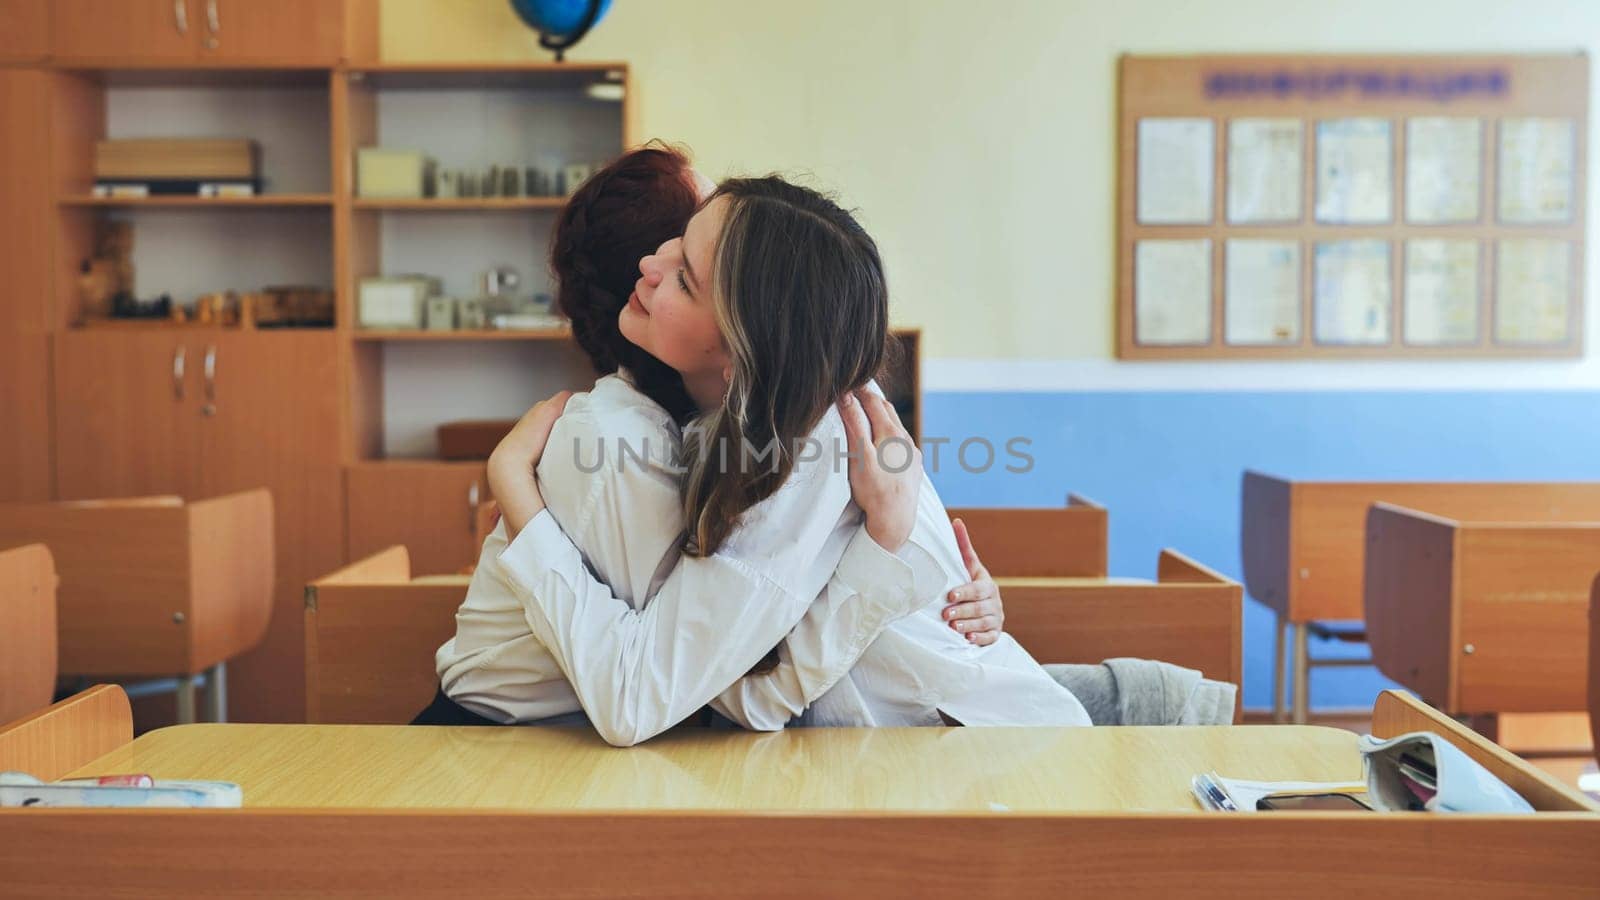 Girl students hugging in a classroom at school. by DovidPro